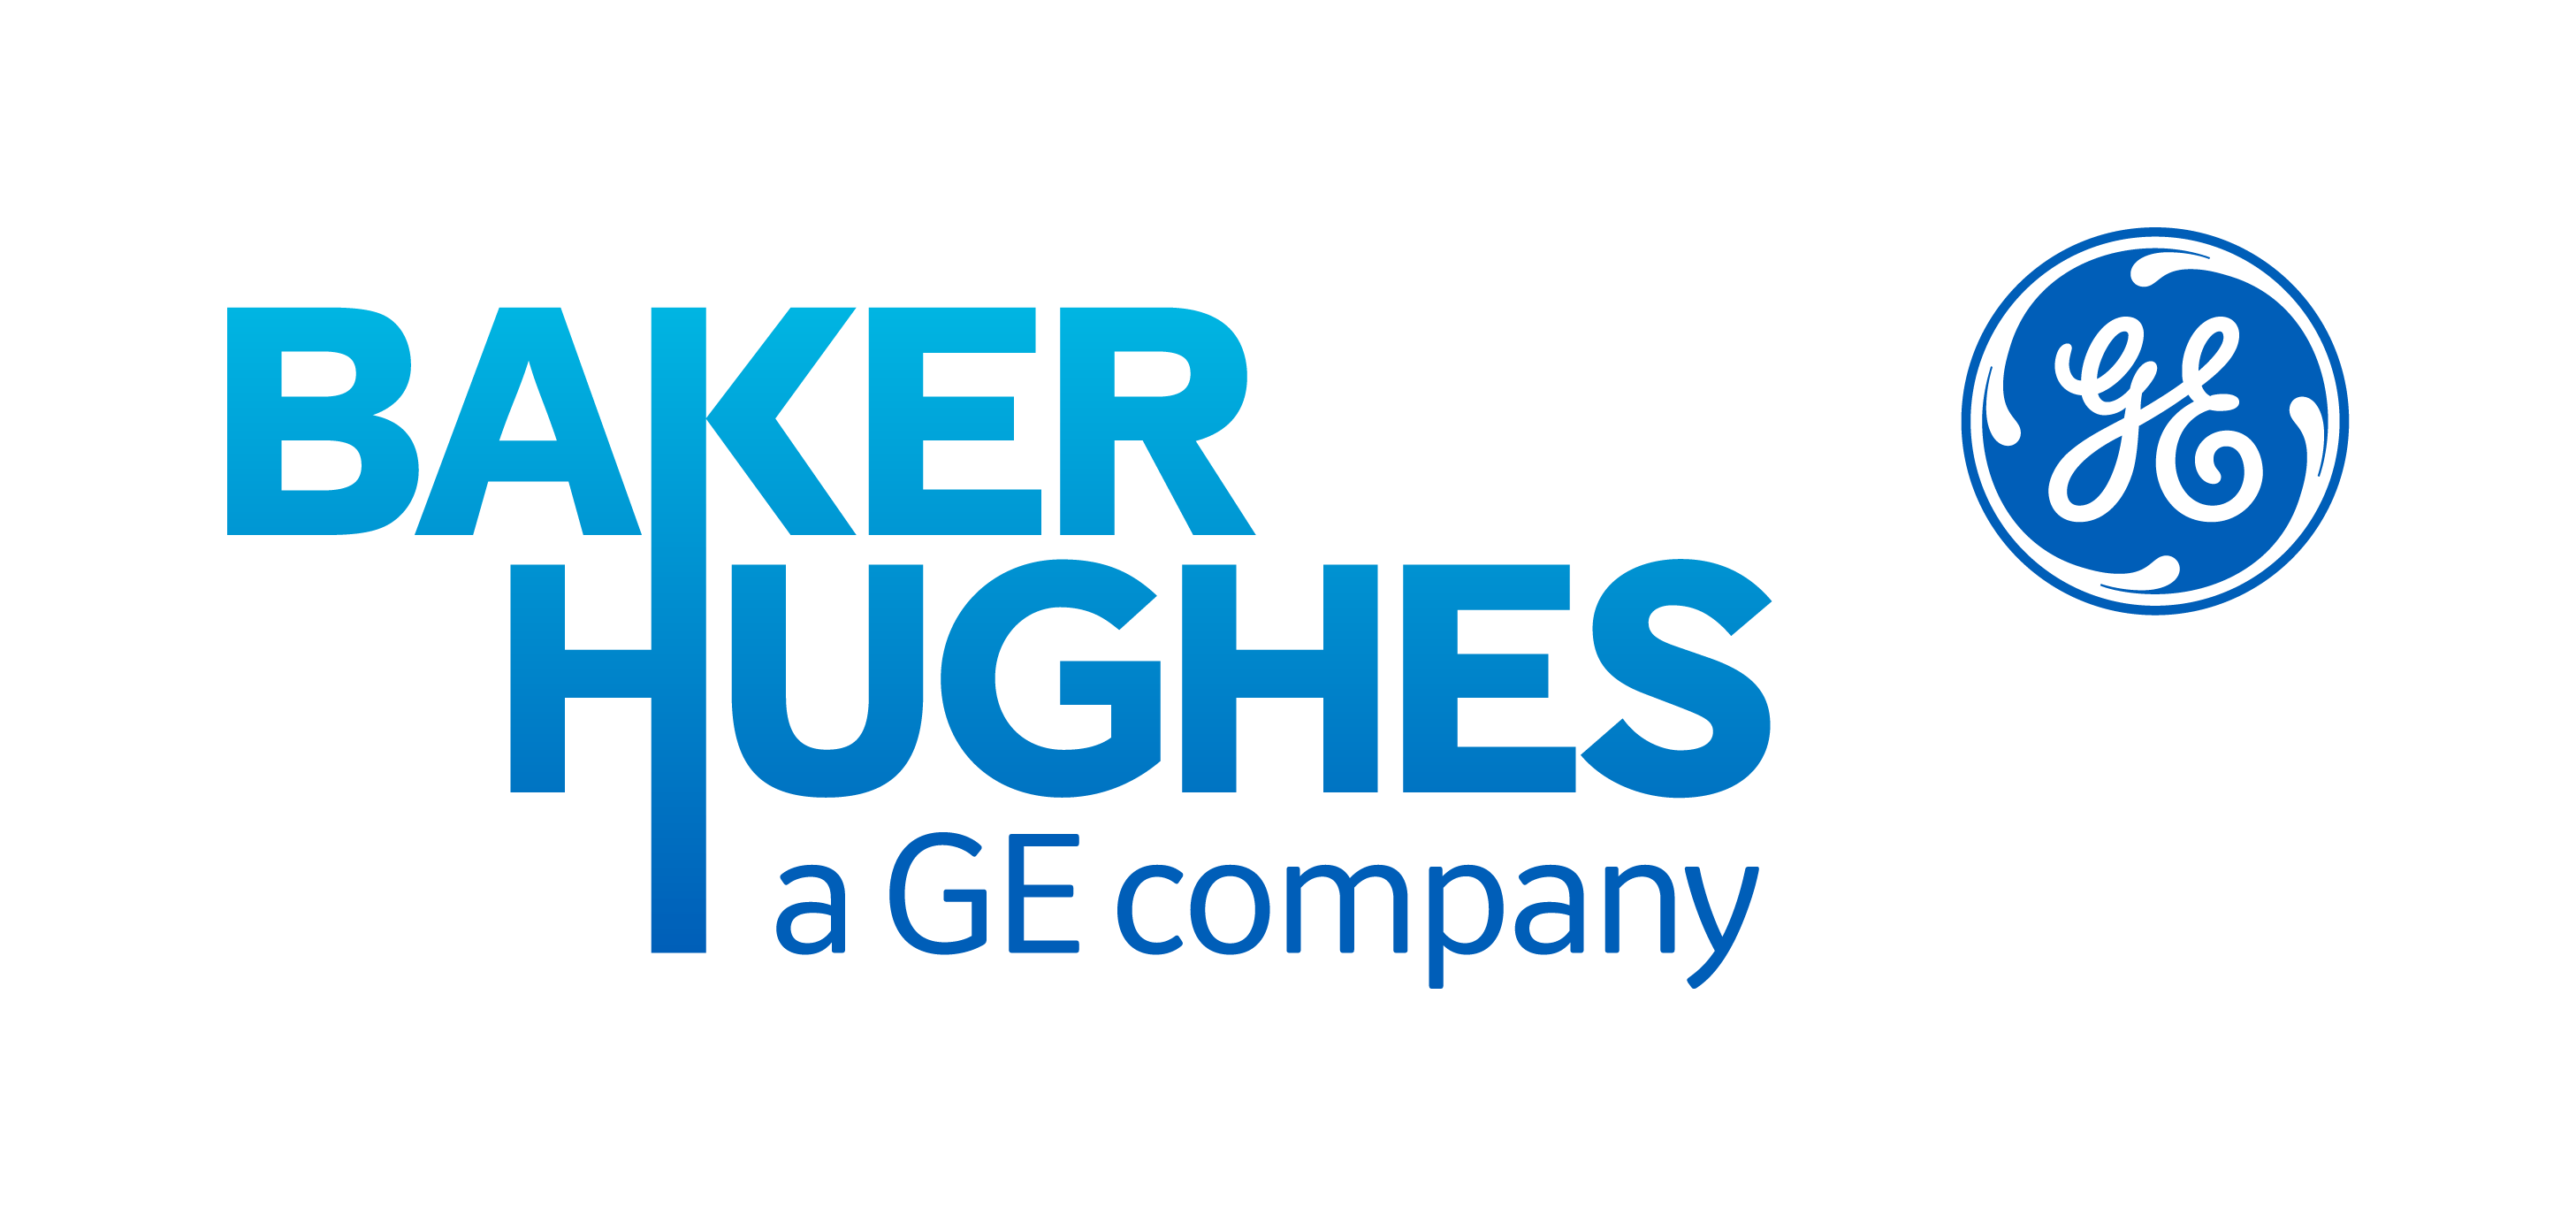 GE Company Logo - Baker Hughes and GE Oil & Gas Complete Merger | COMPRESSORtech2